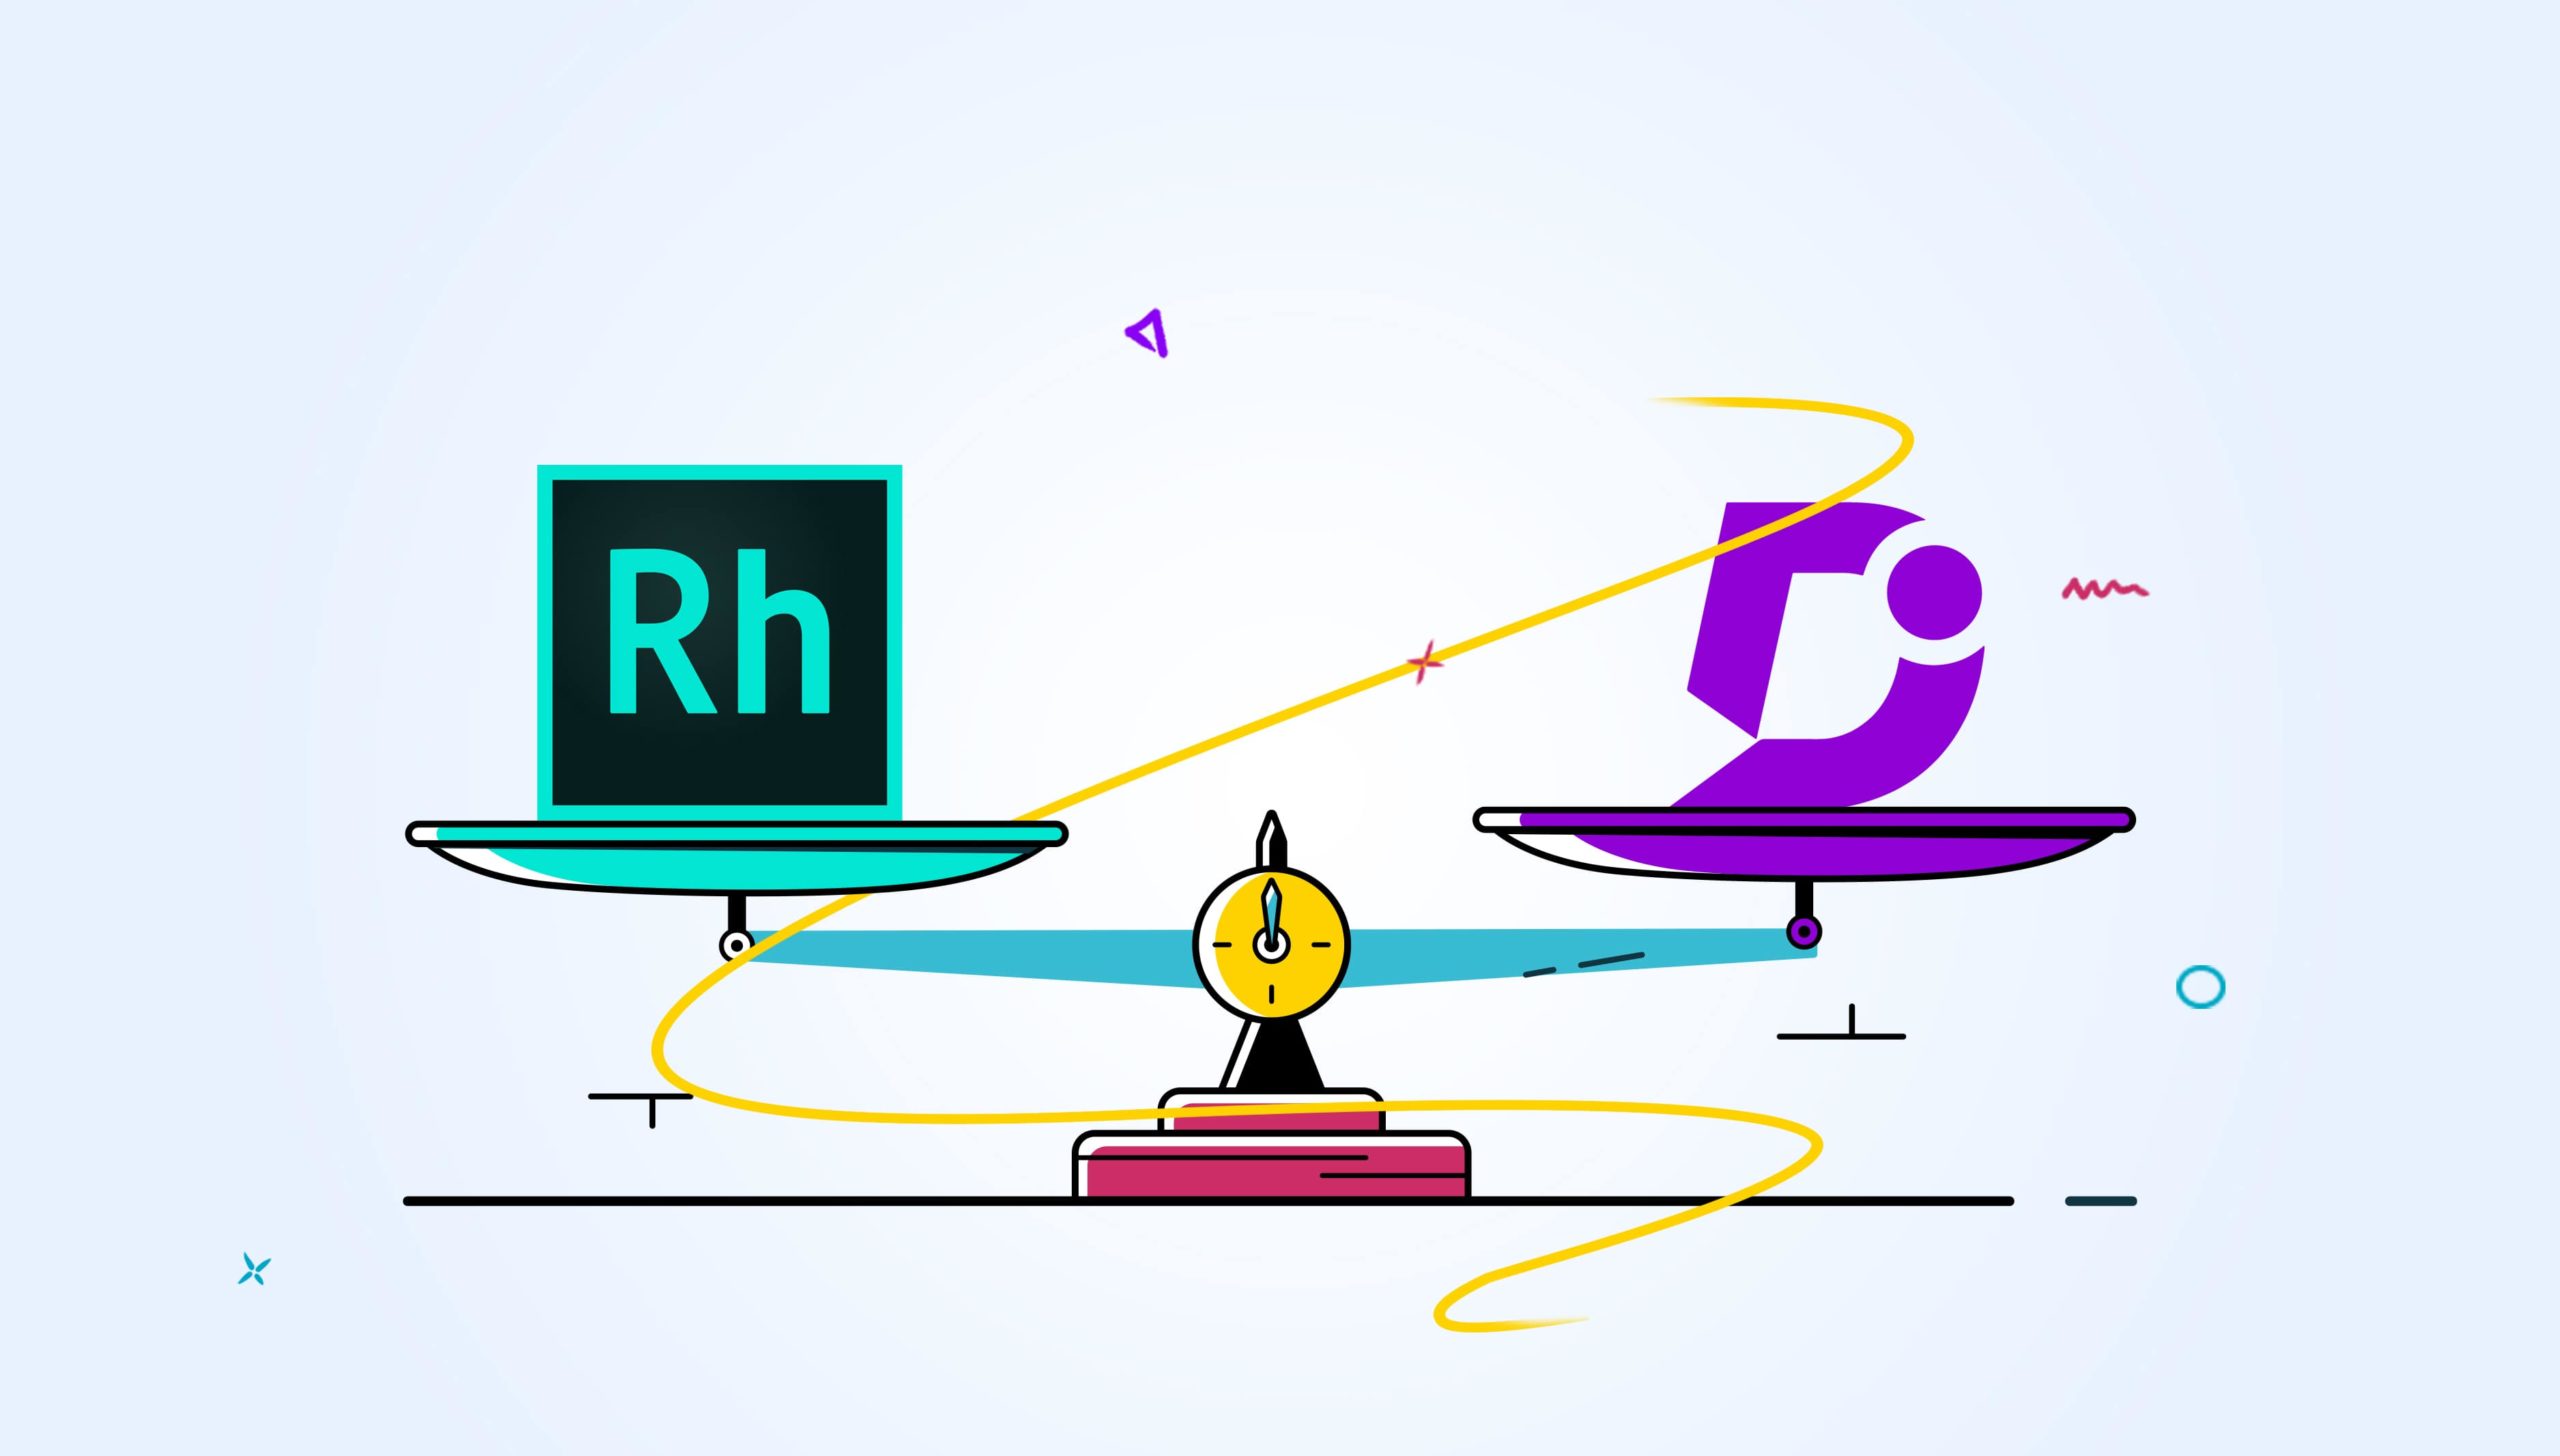 Key differences between Adobe RoboHelp and Document360